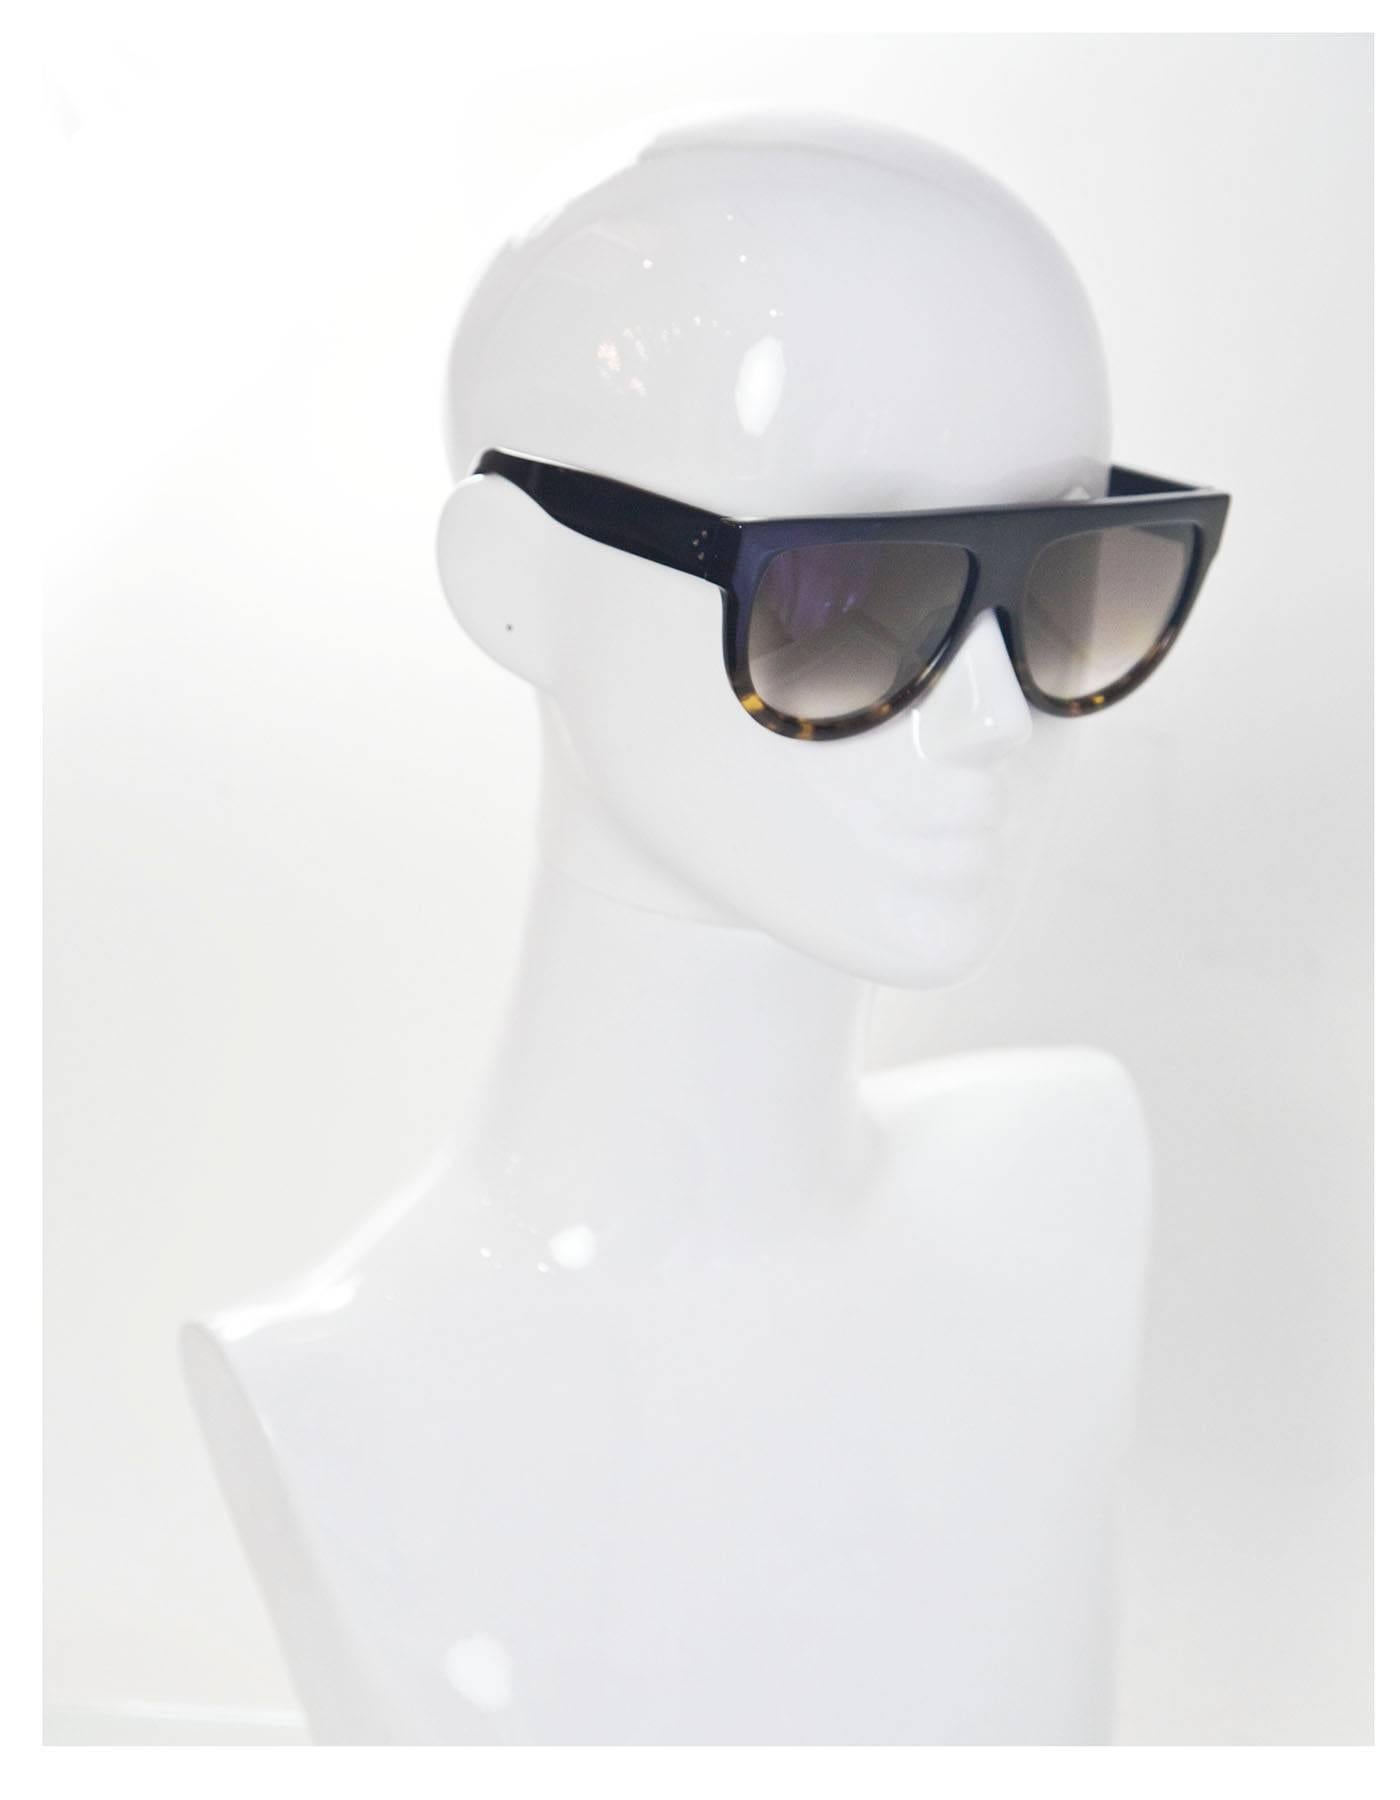 Celine Shadow Sunglasses 

Made In: Italy
Color: Black, tortoise
Materials: Resin
Retail Price: $450
Overall Condition: Excellent pre-owned condition - light surface marks
Includes: Celine case

Measurements: 
Length Across: 5.75"
Lens: